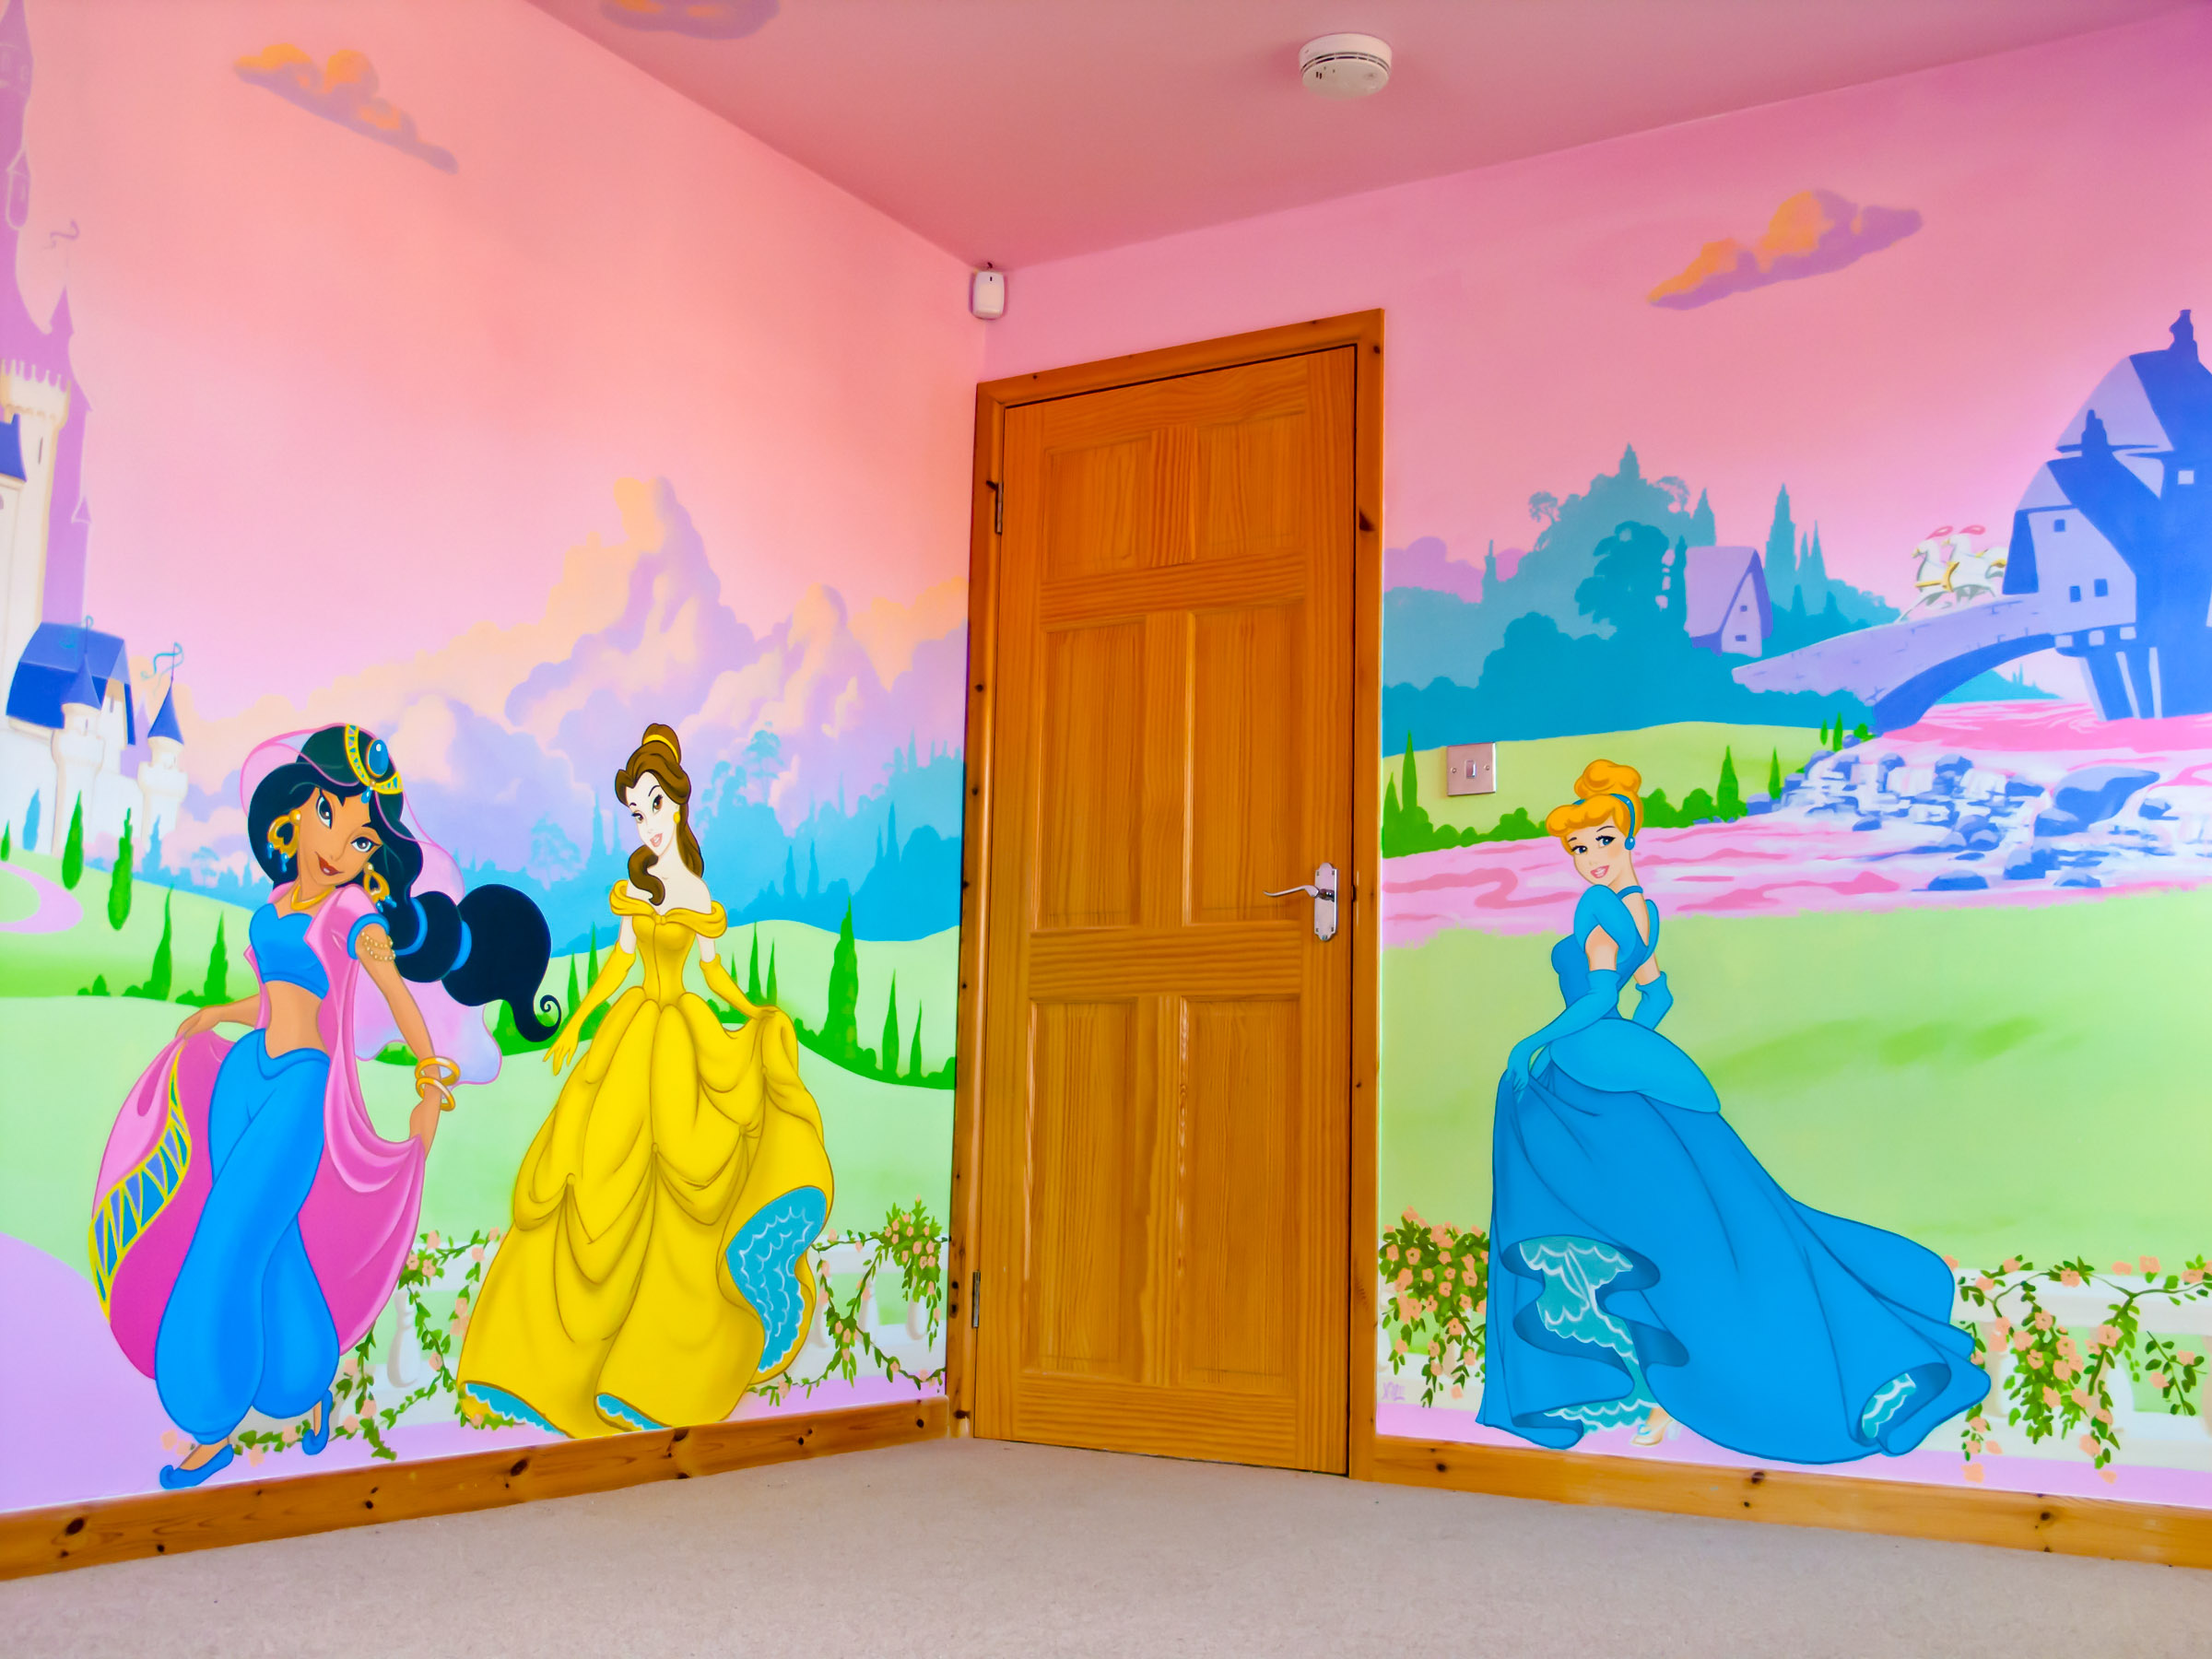 Disney mural with princesses Jasmin, Belle and Cinderella. Shows the entrance door.